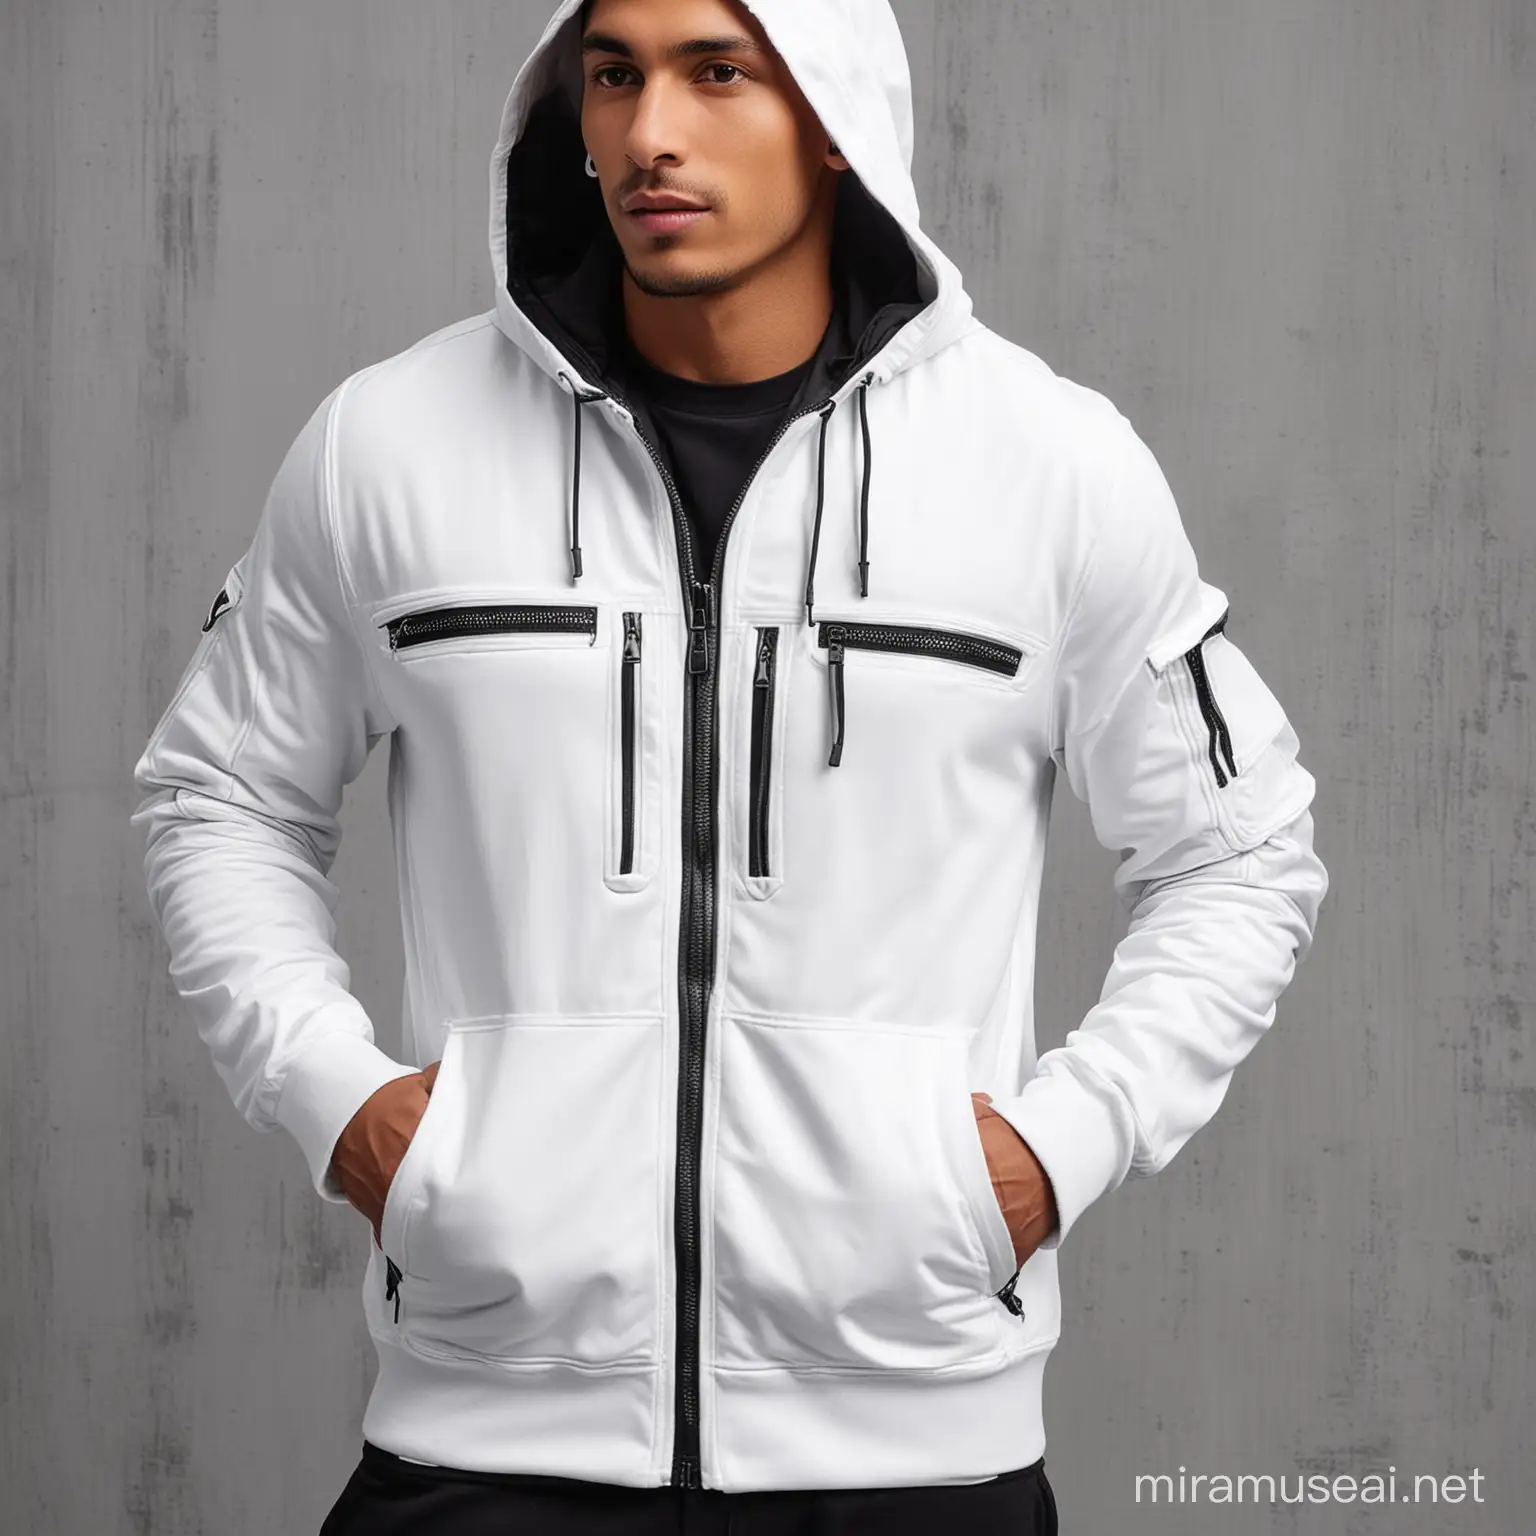 mens white urban style zip front active wear jacket  with hood and cargo pocket on front of jacket and 4 inch ribbing on the around the waist with black zipper